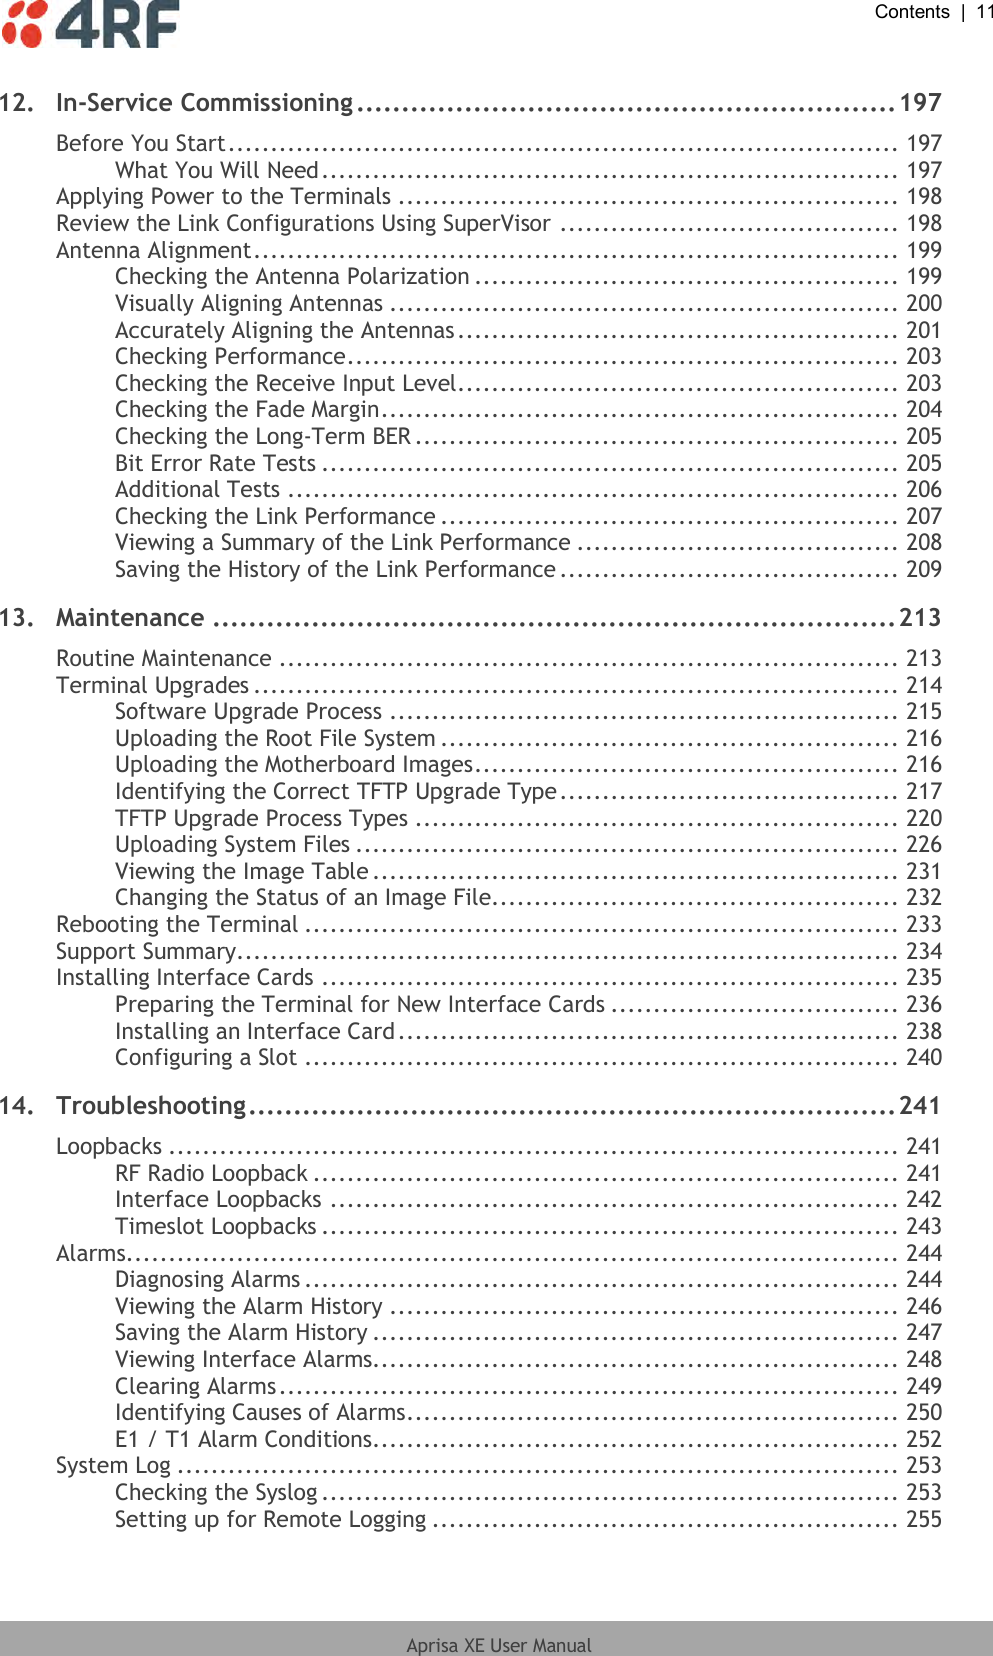  Contents  |  11  Aprisa XE User Manual  12. In-Service Commissioning ............................................................ 197 Before You Start ............................................................................... 197 What You Will Need .................................................................... 197 Applying Power to the Terminals ........................................................... 198 Review the Link Configurations Using SuperVisor ........................................ 198 Antenna Alignment ............................................................................ 199 Checking the Antenna Polarization .................................................. 199 Visually Aligning Antennas ............................................................ 200 Accurately Aligning the Antennas .................................................... 201 Checking Performance ................................................................. 203 Checking the Receive Input Level .................................................... 203 Checking the Fade Margin ............................................................. 204 Checking the Long-Term BER ......................................................... 205 Bit Error Rate Tests .................................................................... 205 Additional Tests ........................................................................ 206 Checking the Link Performance ...................................................... 207 Viewing a Summary of the Link Performance ...................................... 208 Saving the History of the Link Performance ........................................ 209 13. Maintenance ............................................................................ 213 Routine Maintenance ......................................................................... 213 Terminal Upgrades ............................................................................ 214 Software Upgrade Process ............................................................ 215 Uploading the Root File System ...................................................... 216 Uploading the Motherboard Images .................................................. 216 Identifying the Correct TFTP Upgrade Type ........................................ 217 TFTP Upgrade Process Types ......................................................... 220 Uploading System Files ................................................................ 226 Viewing the Image Table .............................................................. 231 Changing the Status of an Image File................................................ 232 Rebooting the Terminal ...................................................................... 233 Support Summary.............................................................................. 234 Installing Interface Cards .................................................................... 235 Preparing the Terminal for New Interface Cards .................................. 236 Installing an Interface Card ........................................................... 238 Configuring a Slot ...................................................................... 240 14. Troubleshooting ........................................................................ 241 Loopbacks ...................................................................................... 241 RF Radio Loopback ..................................................................... 241 Interface Loopbacks ................................................................... 242 Timeslot Loopbacks .................................................................... 243 Alarms........................................................................................... 244 Diagnosing Alarms ...................................................................... 244 Viewing the Alarm History ............................................................ 246 Saving the Alarm History .............................................................. 247 Viewing Interface Alarms.............................................................. 248 Clearing Alarms ......................................................................... 249 Identifying Causes of Alarms .......................................................... 250 E1 / T1 Alarm Conditions.............................................................. 252 System Log ..................................................................................... 253 Checking the Syslog .................................................................... 253 Setting up for Remote Logging ....................................................... 255 